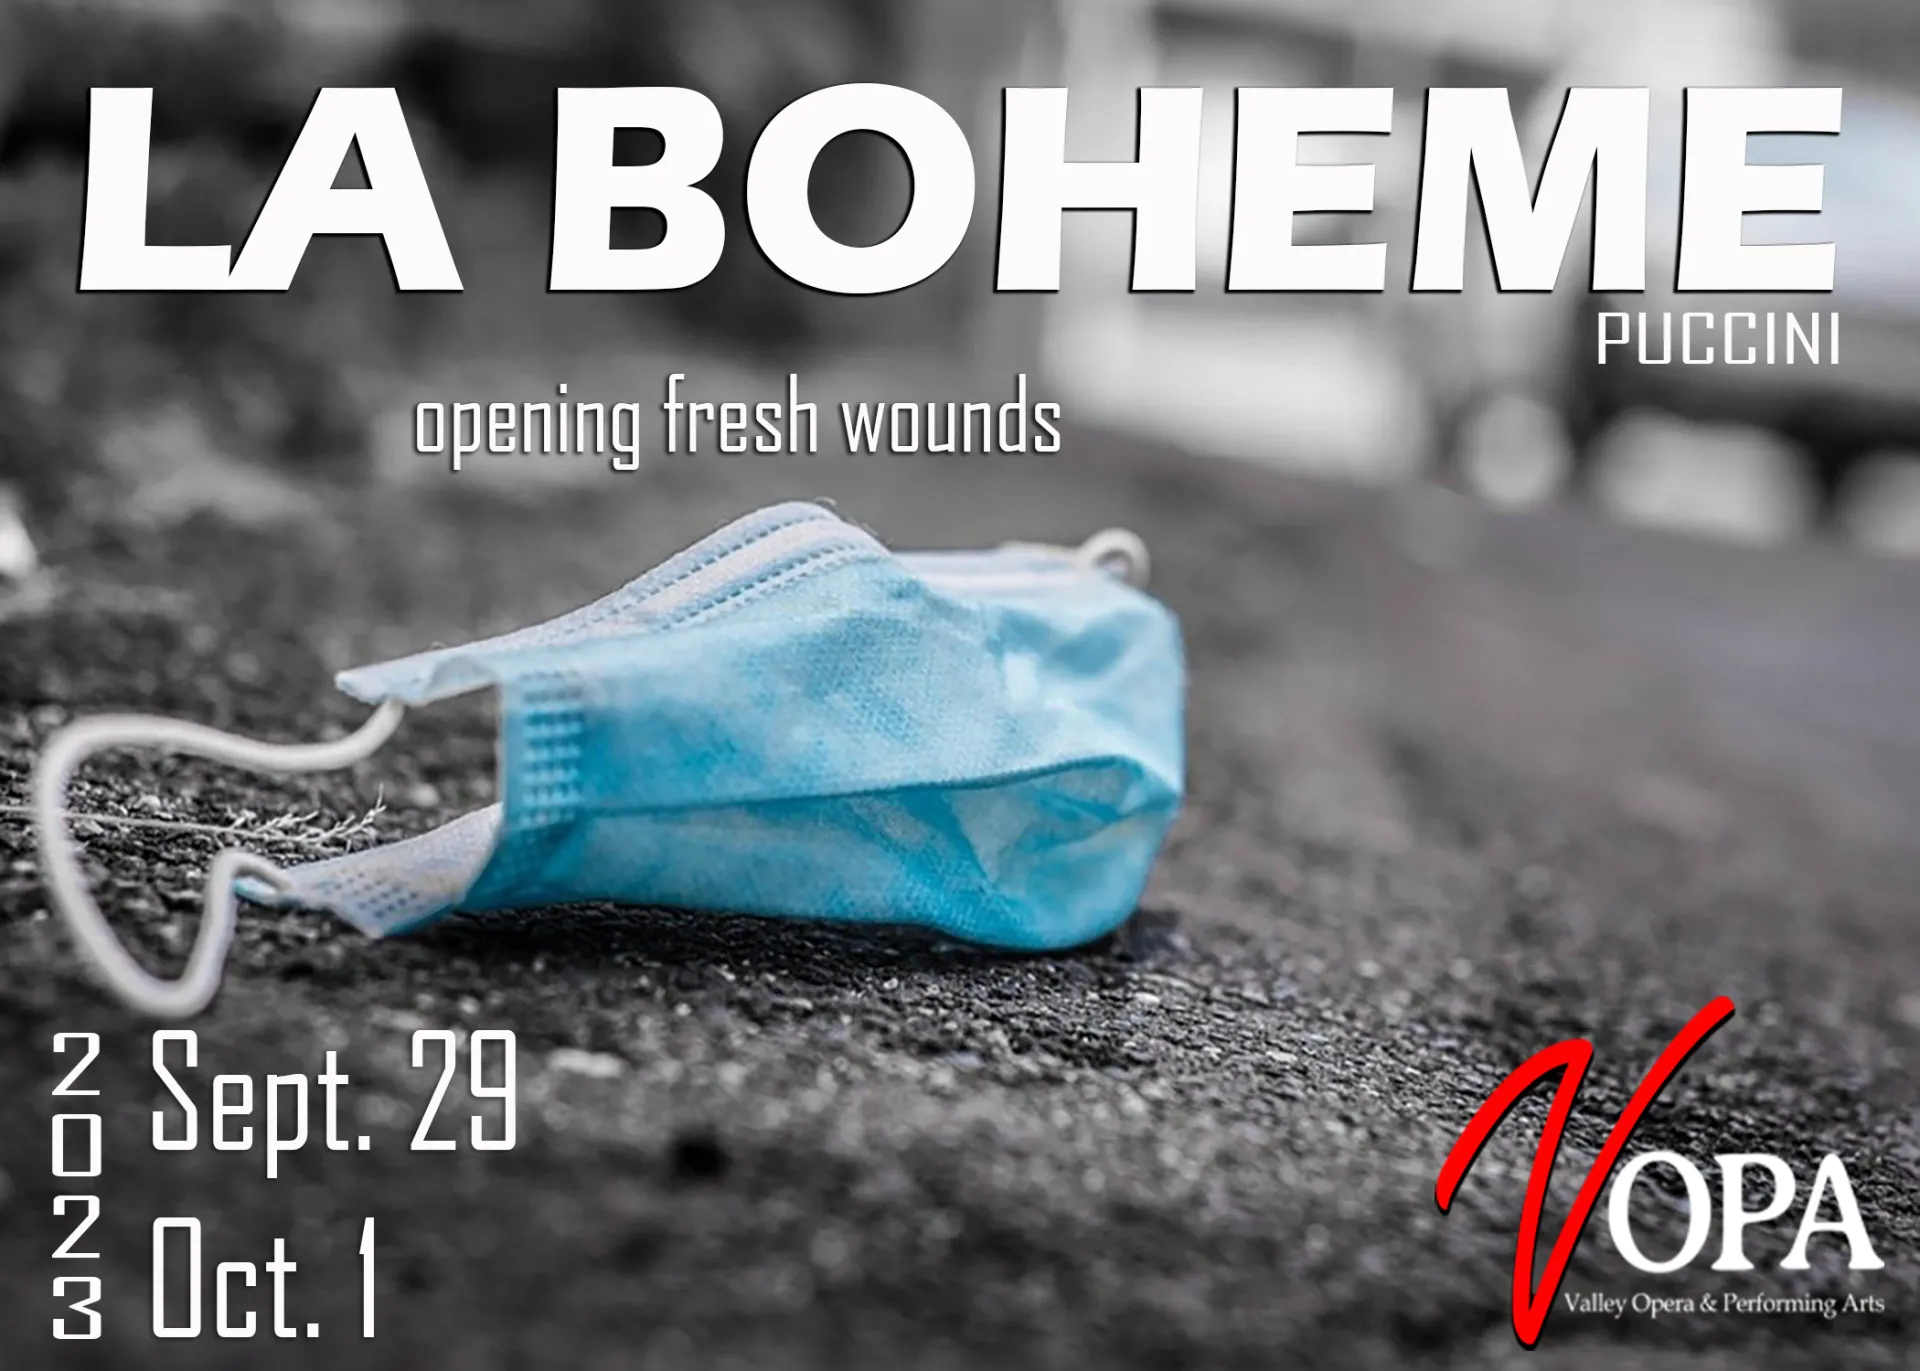 VOPA's La Boheme promotional image. La Boheme, Opening fresh wounds. Image of soiled surgical face mask laying on the street. September 29th  and October 1st